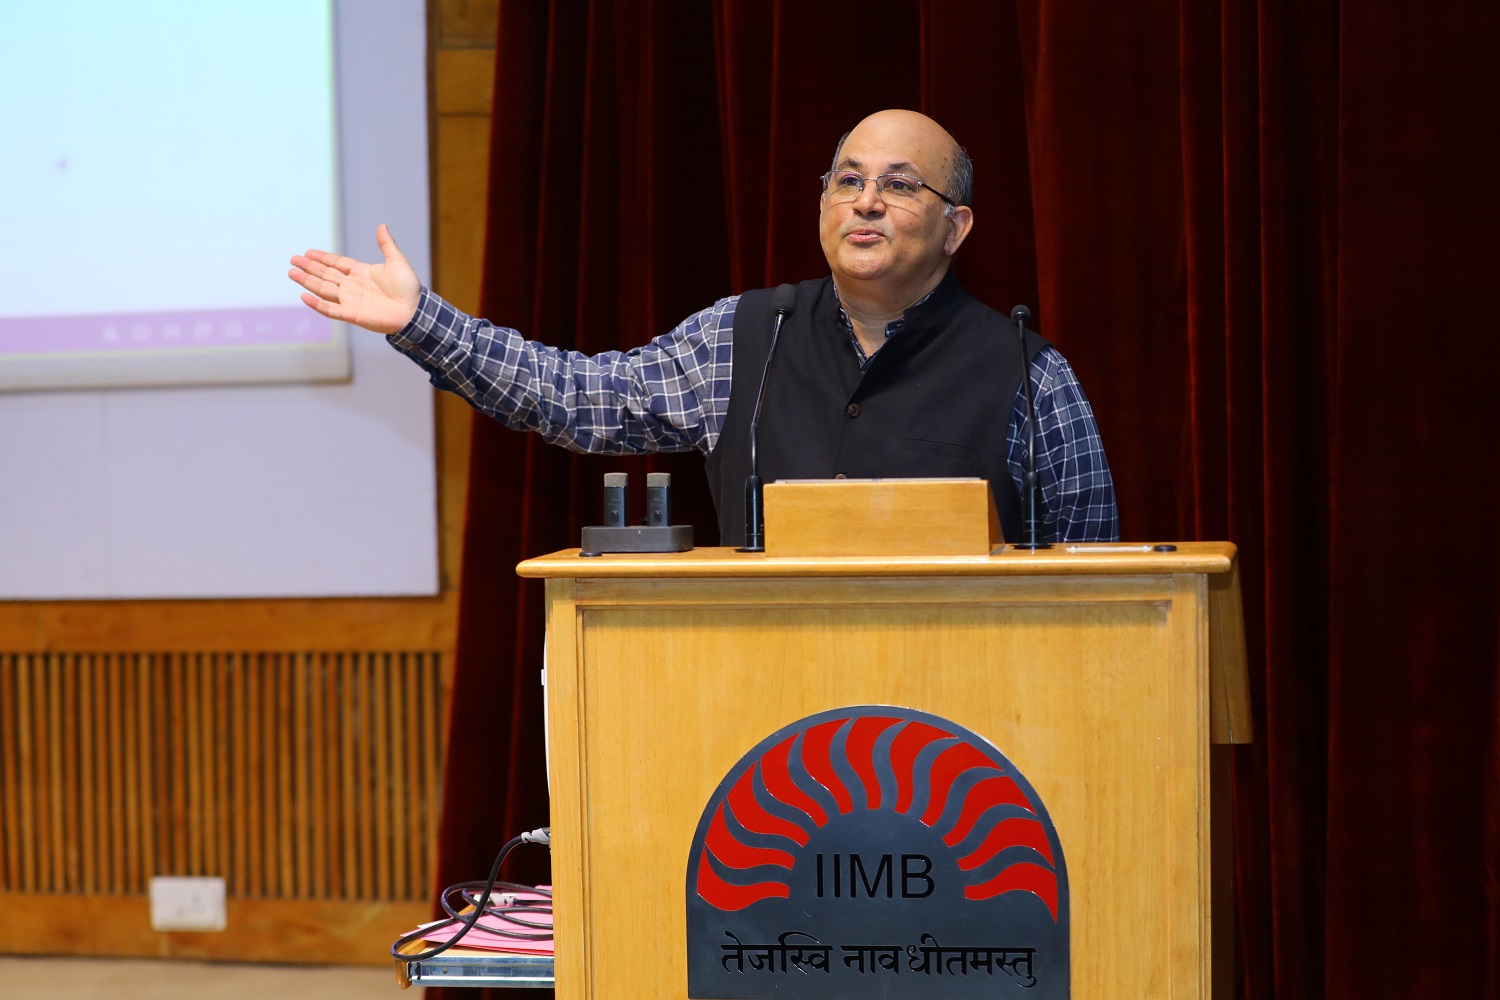 Professor Rishikesha T. Krishnan, Director of IIM Bangalore, provides an overview of the institute and extends a warm welcome to participants at the Business Conclave.